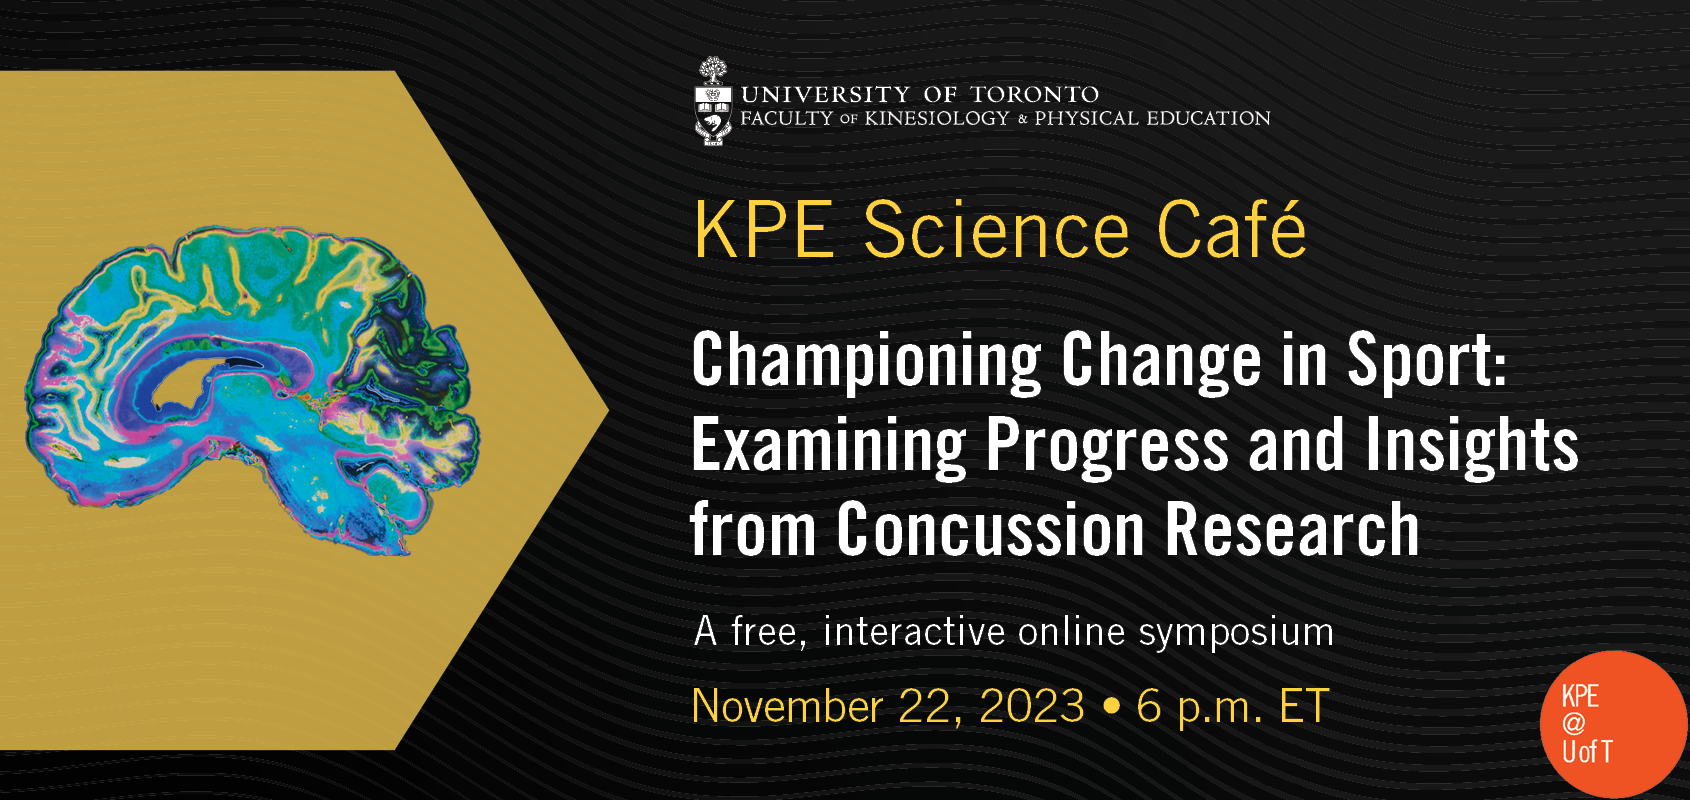 photo of brain scan with text: KPE Science Cafe, championing change in sport: examining progress and insights in concussion research 